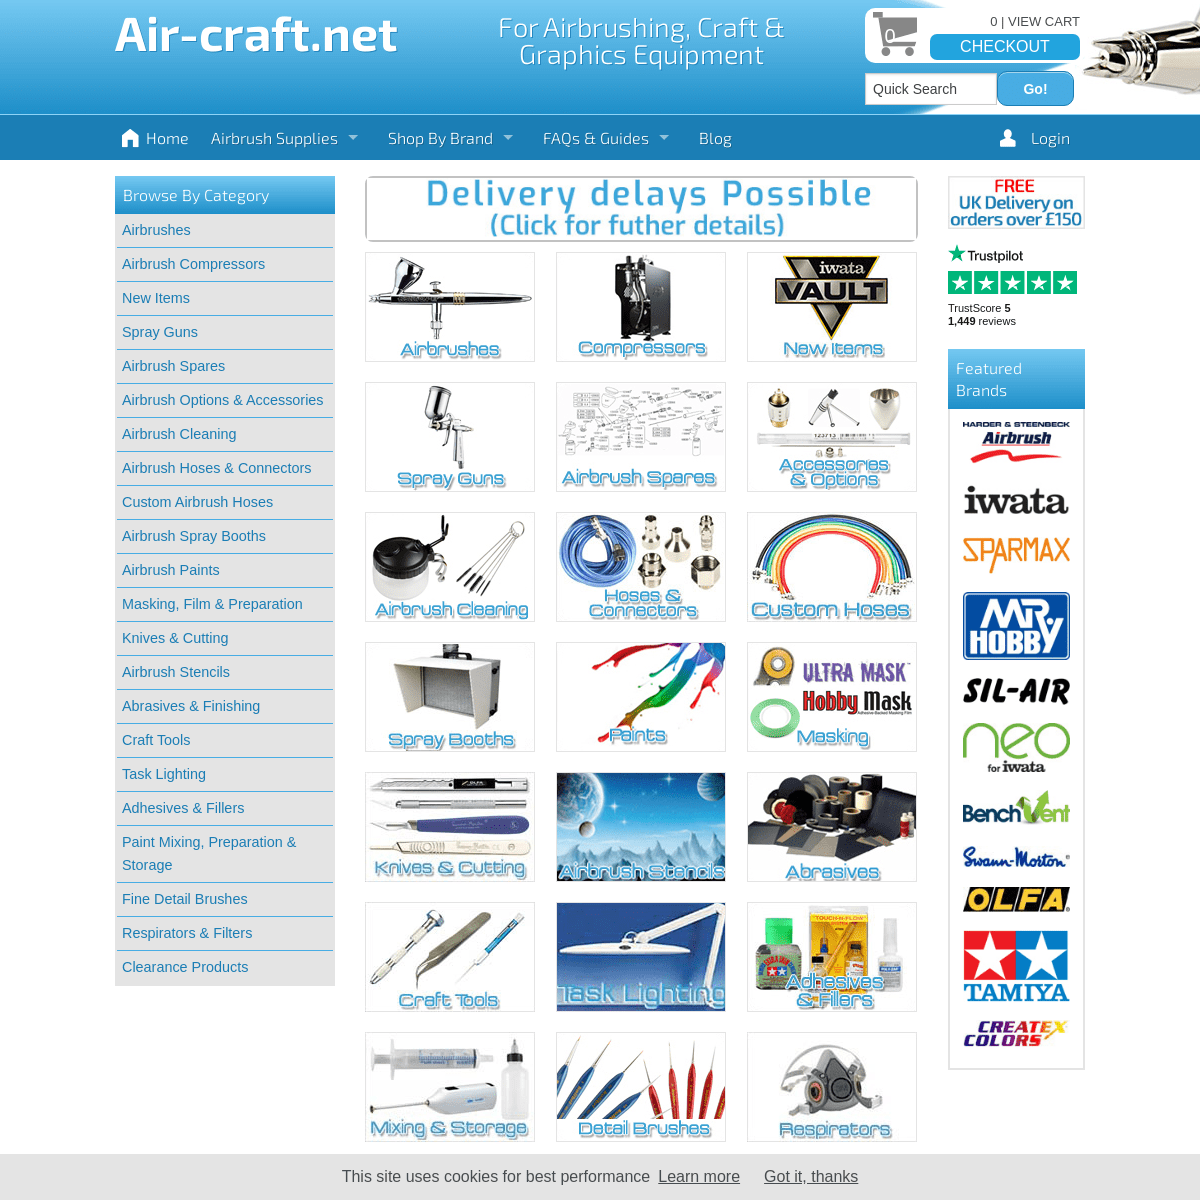 A complete backup of air-craft.net